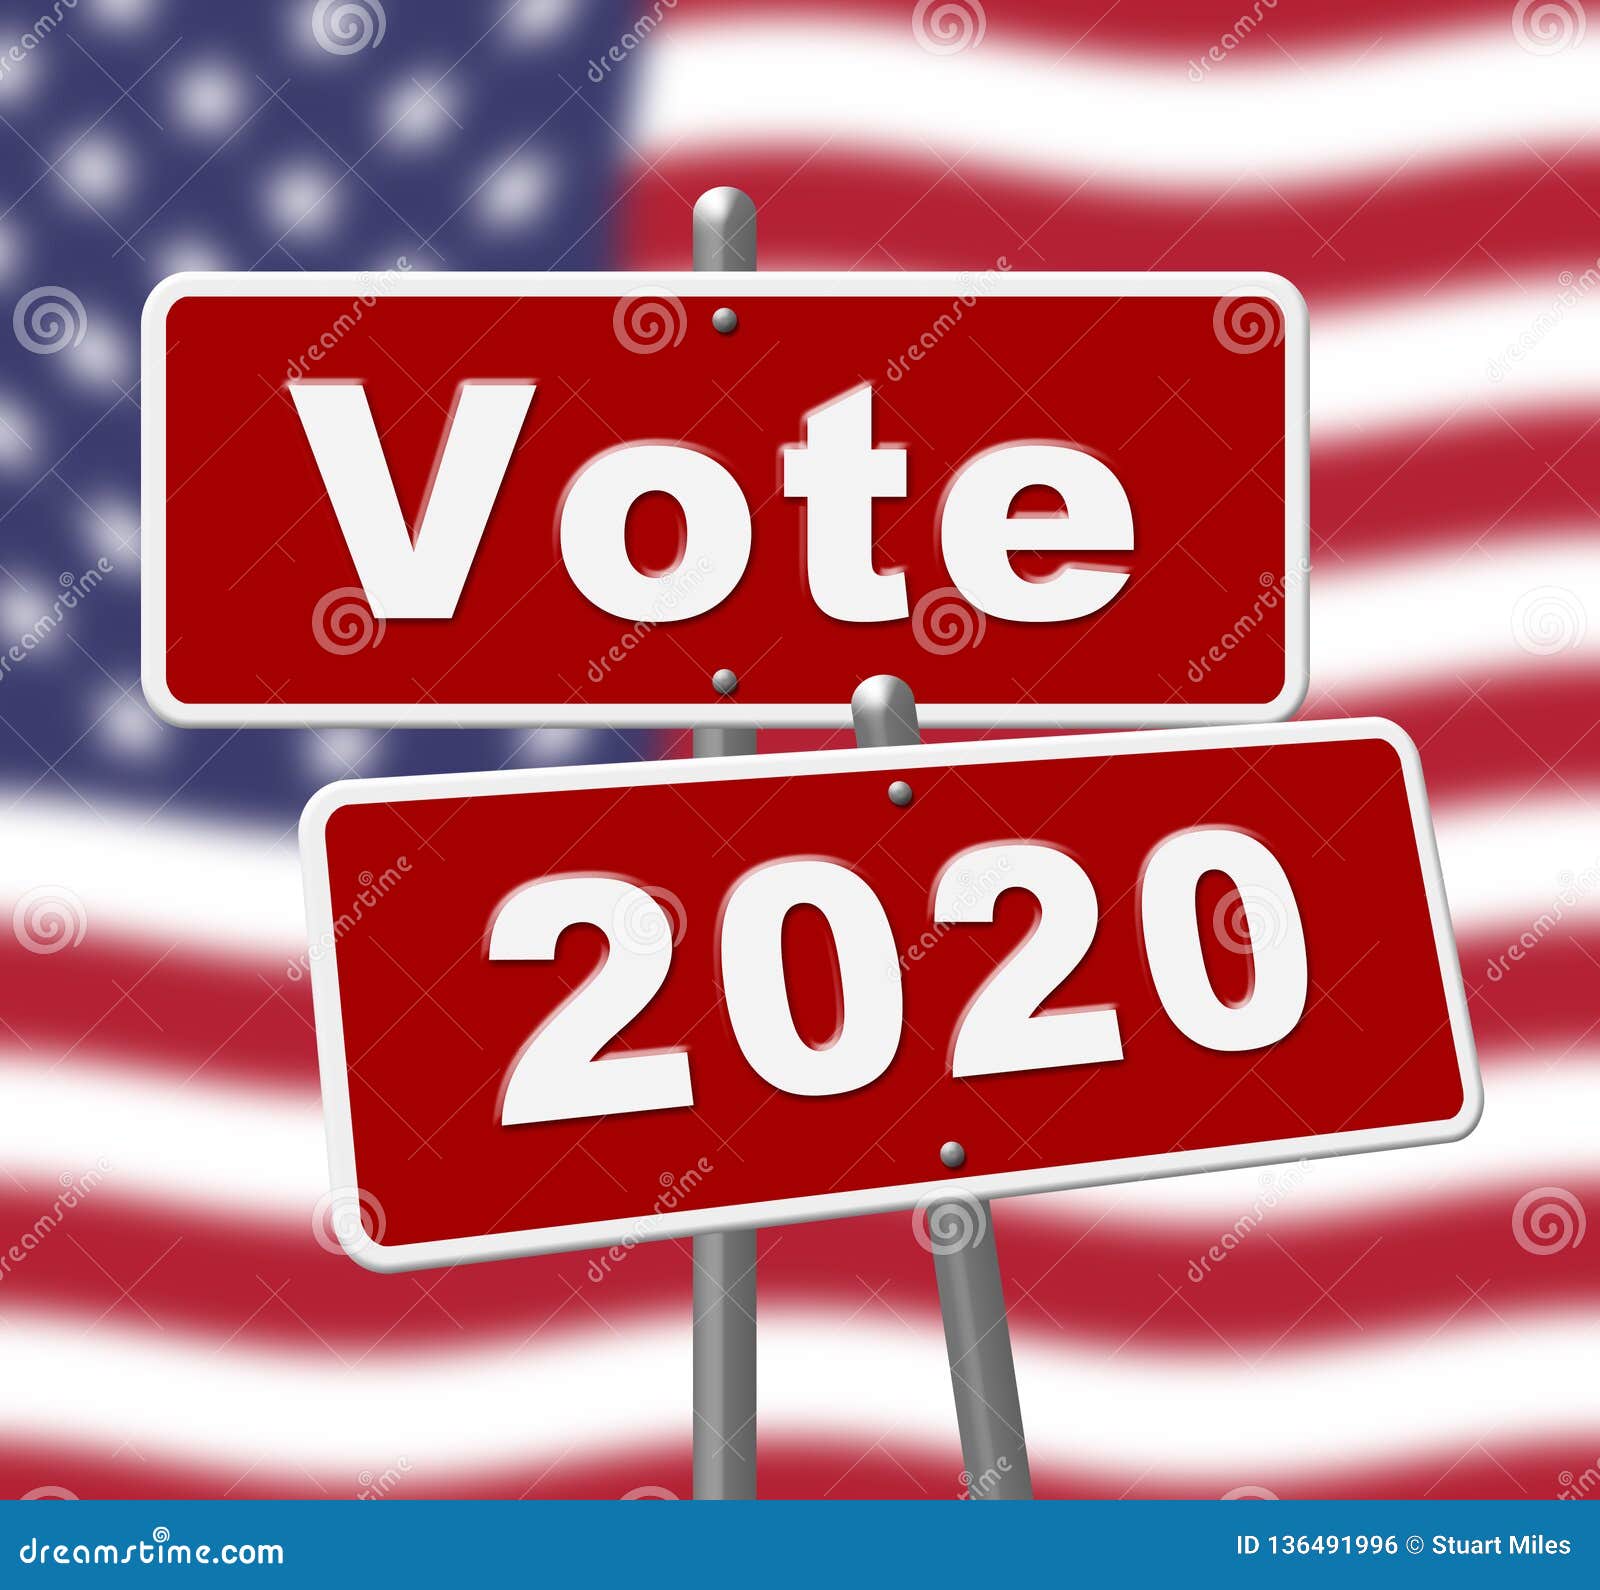 2020 Election Usa Presidential Vote for Candidate - 2d Illustration ...